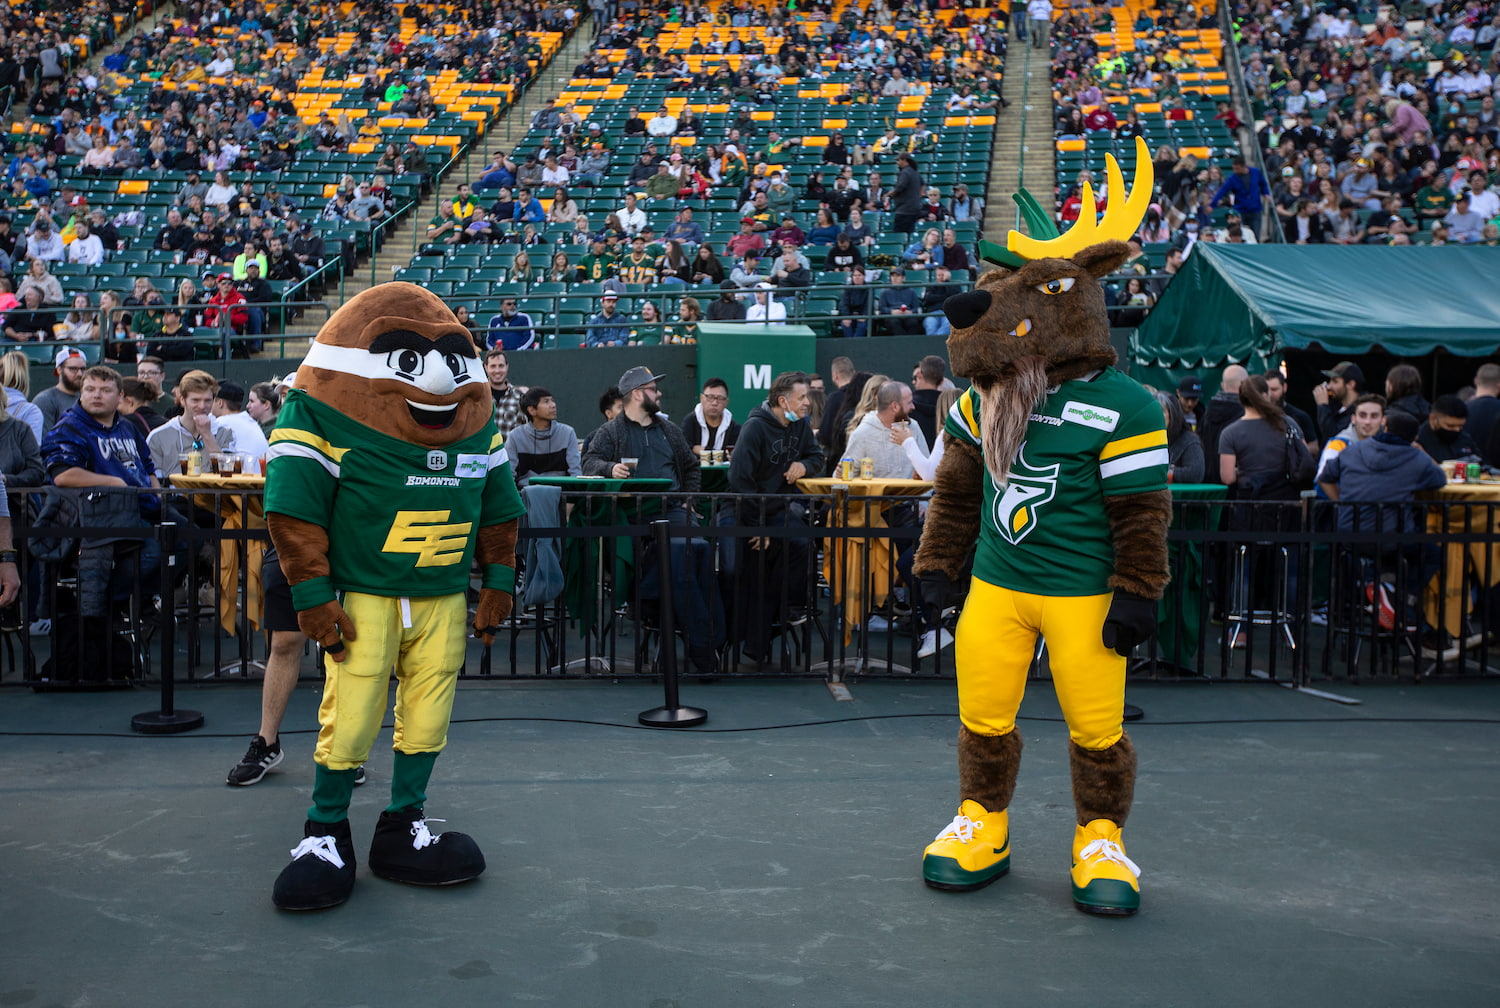 The old Edmonton mascot, Punter, stands with the new mascot, Spike the Elk, at a game in September.